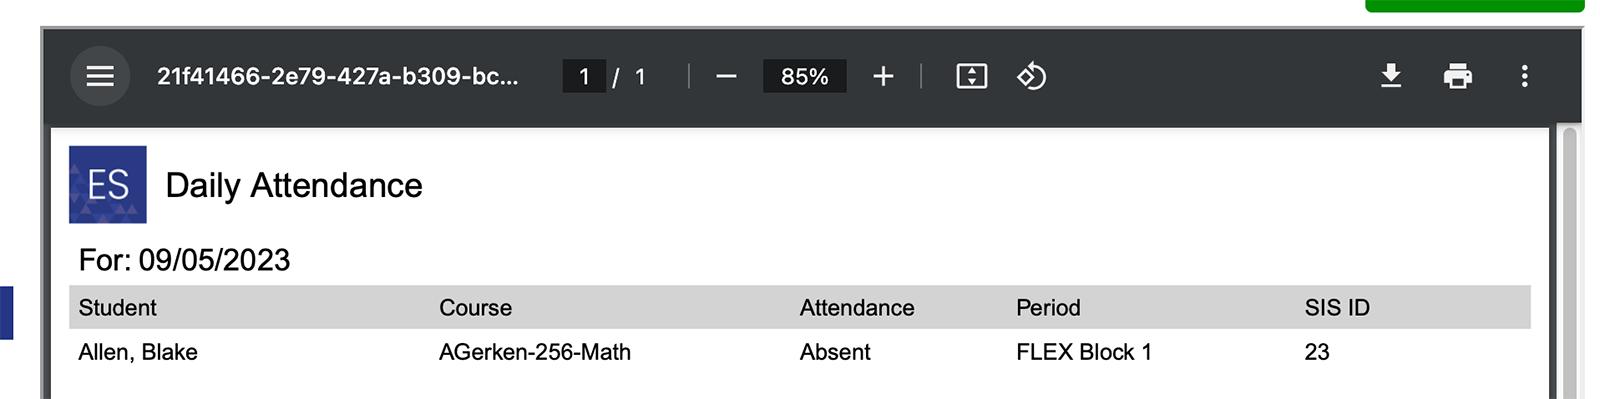 daily-attendance-report-example.png